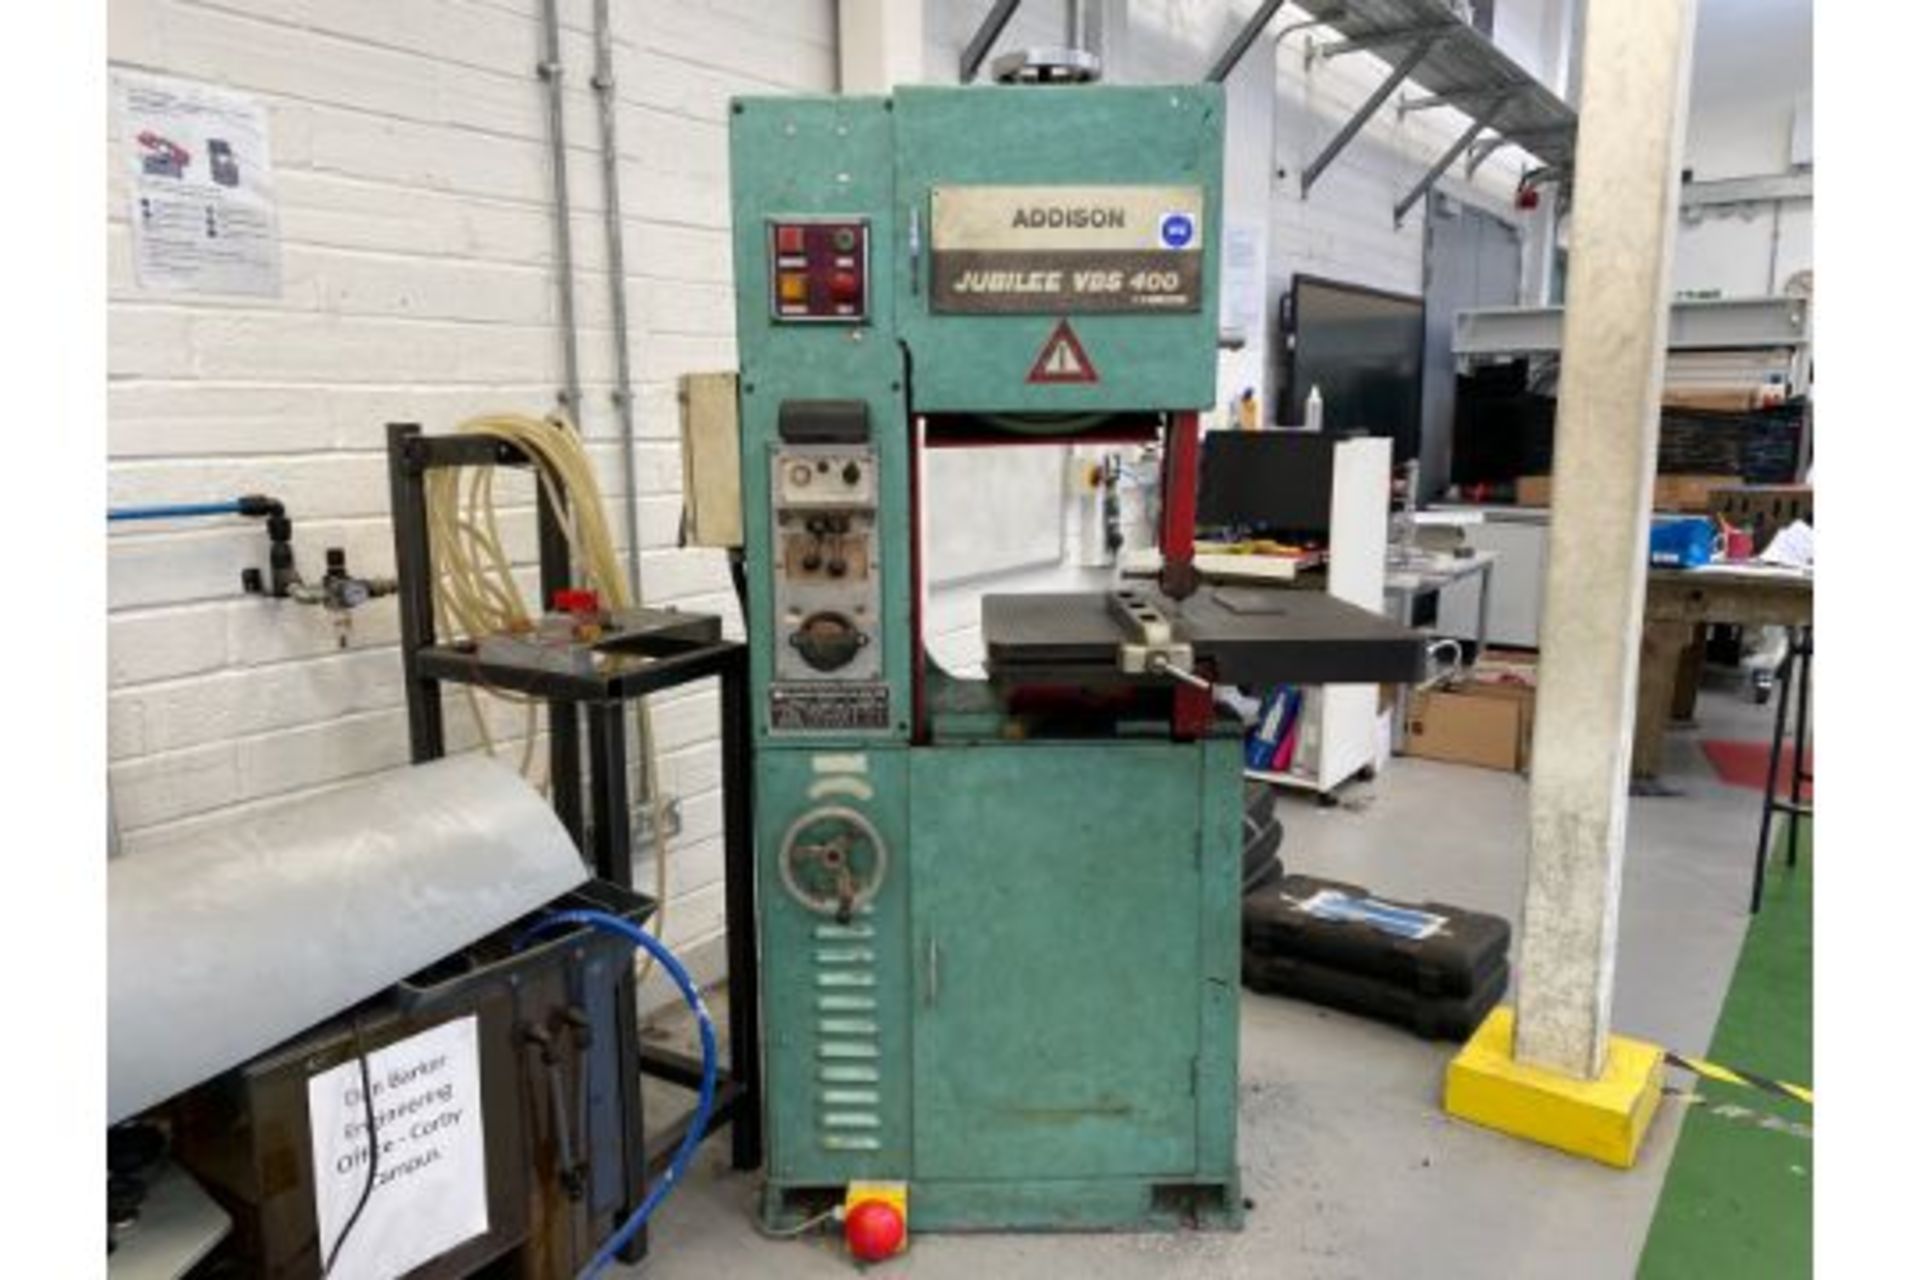 Addison Jubilee VBS 400 Vertical Variable Speed Bandsaw with Stationary Table - Image 2 of 10